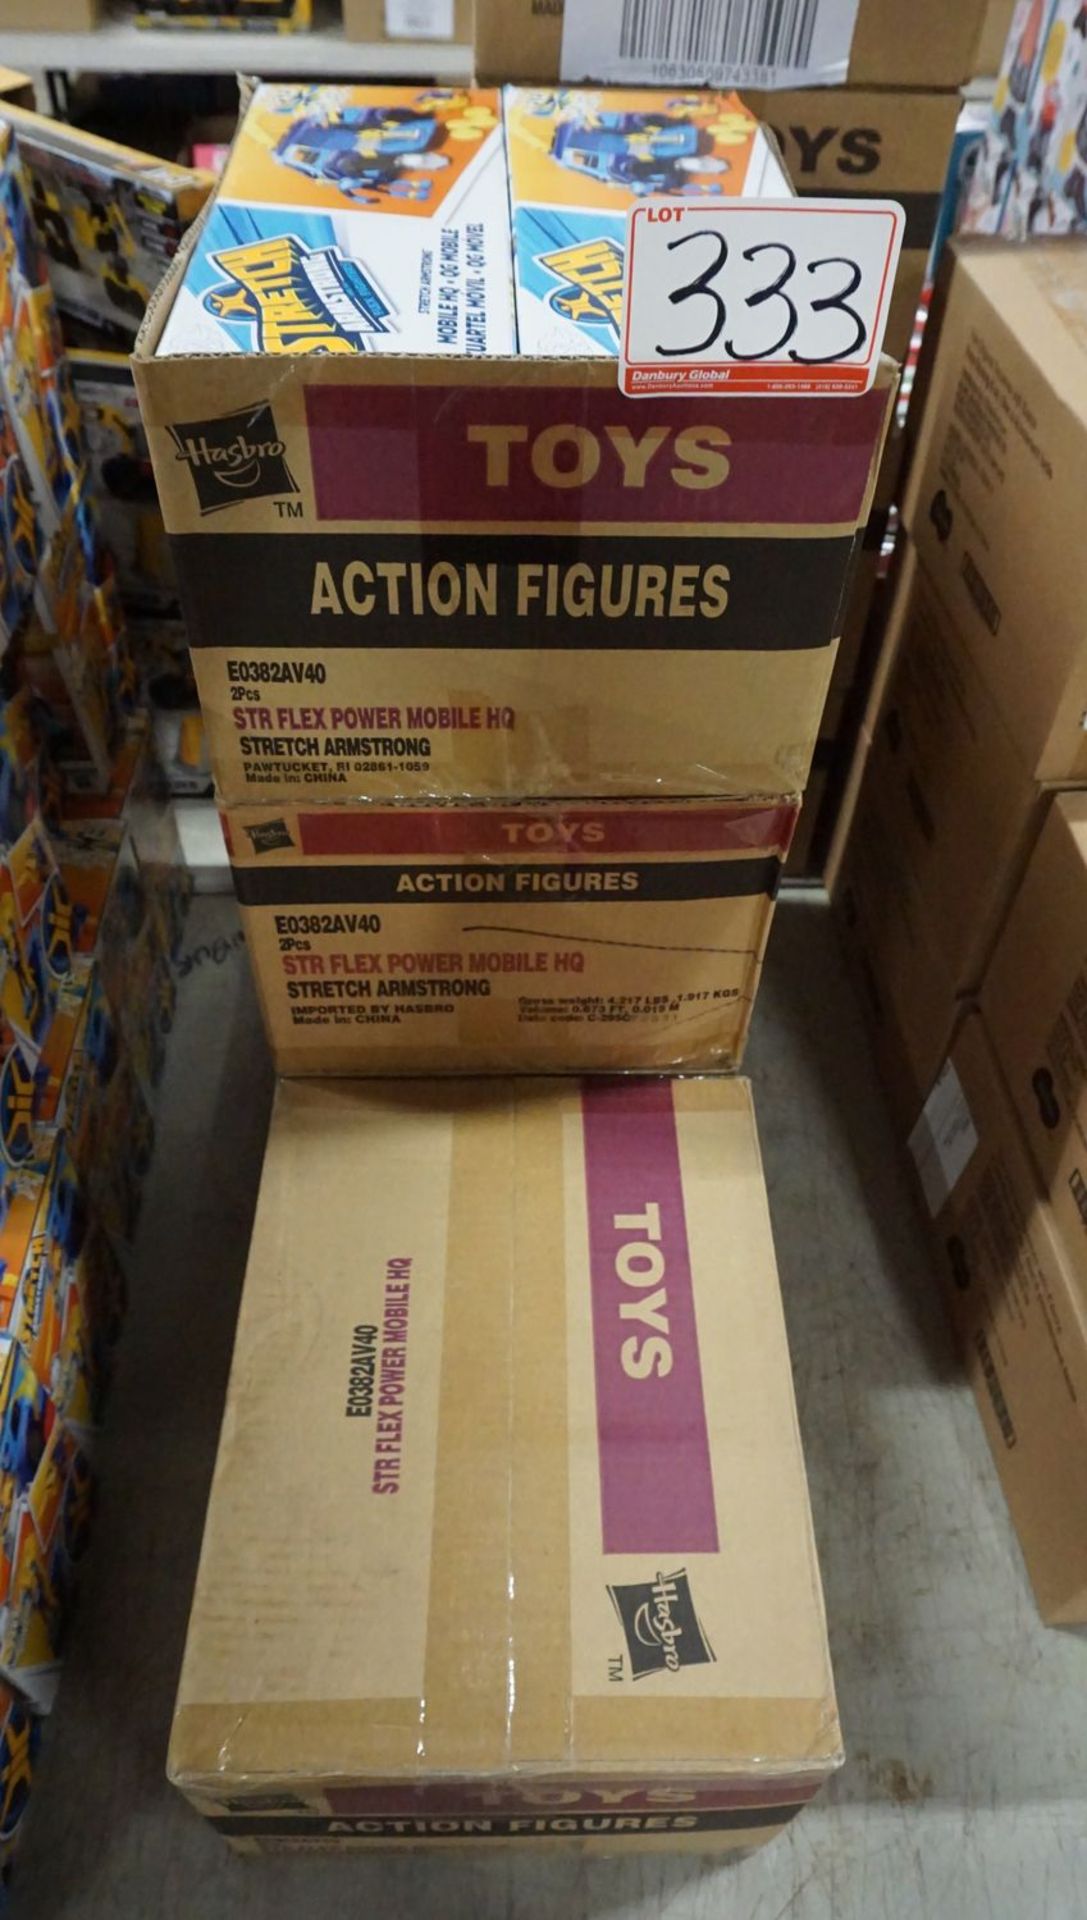 BOXES - HASBRO STRETCH ARMSTRONG MOBILE HQ (2 PCS/BOX) (19 BOXES & 19 LOOSE) - Image 3 of 3